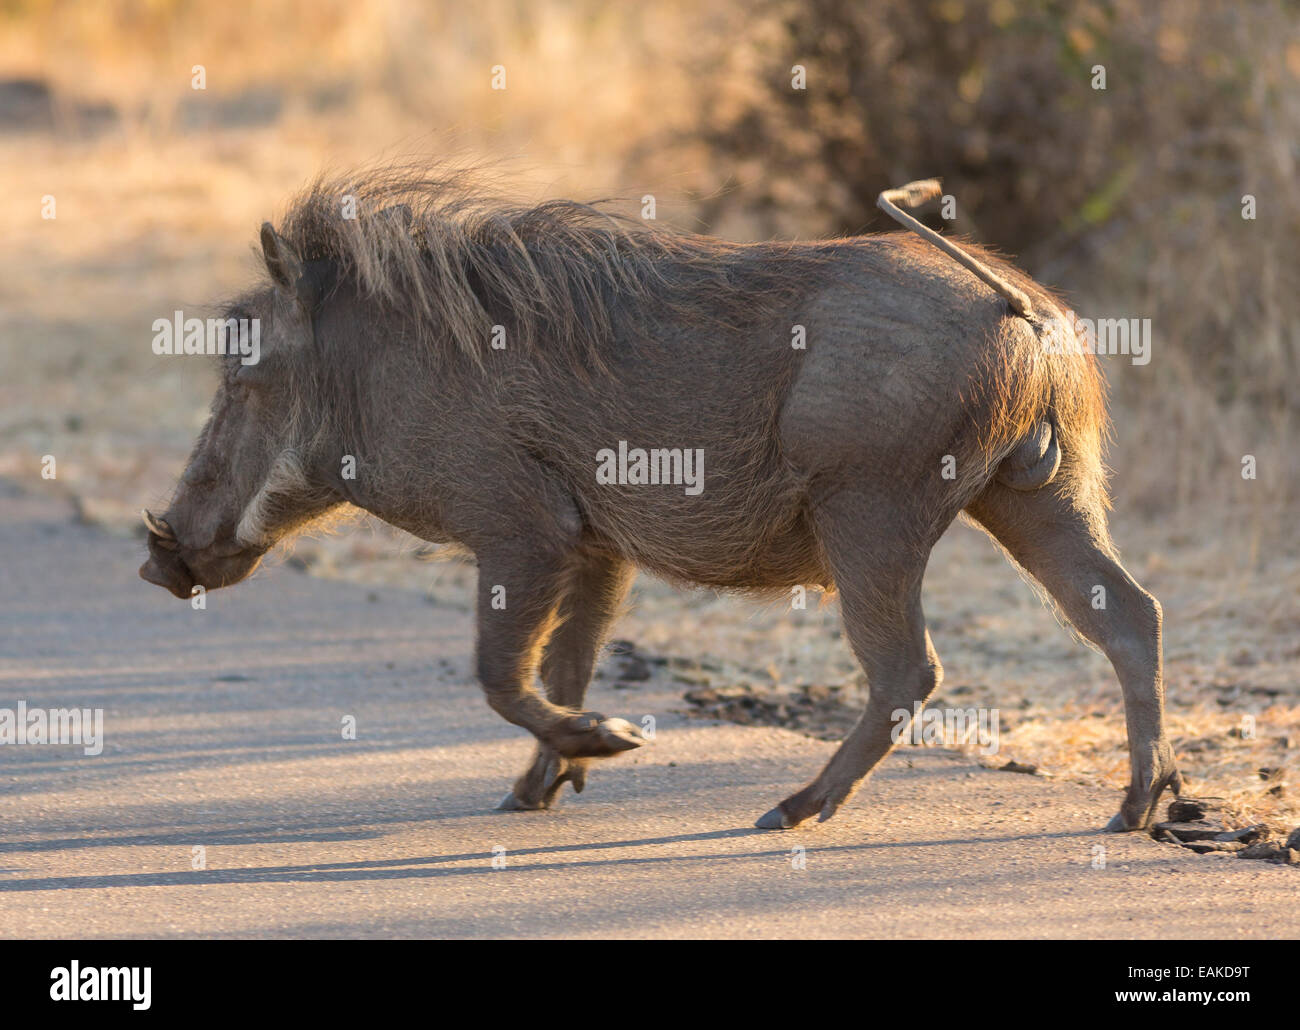 KRUGER NATIONAL PARK, SOUTH AFRICA - Warthog crossing road Stock Photo